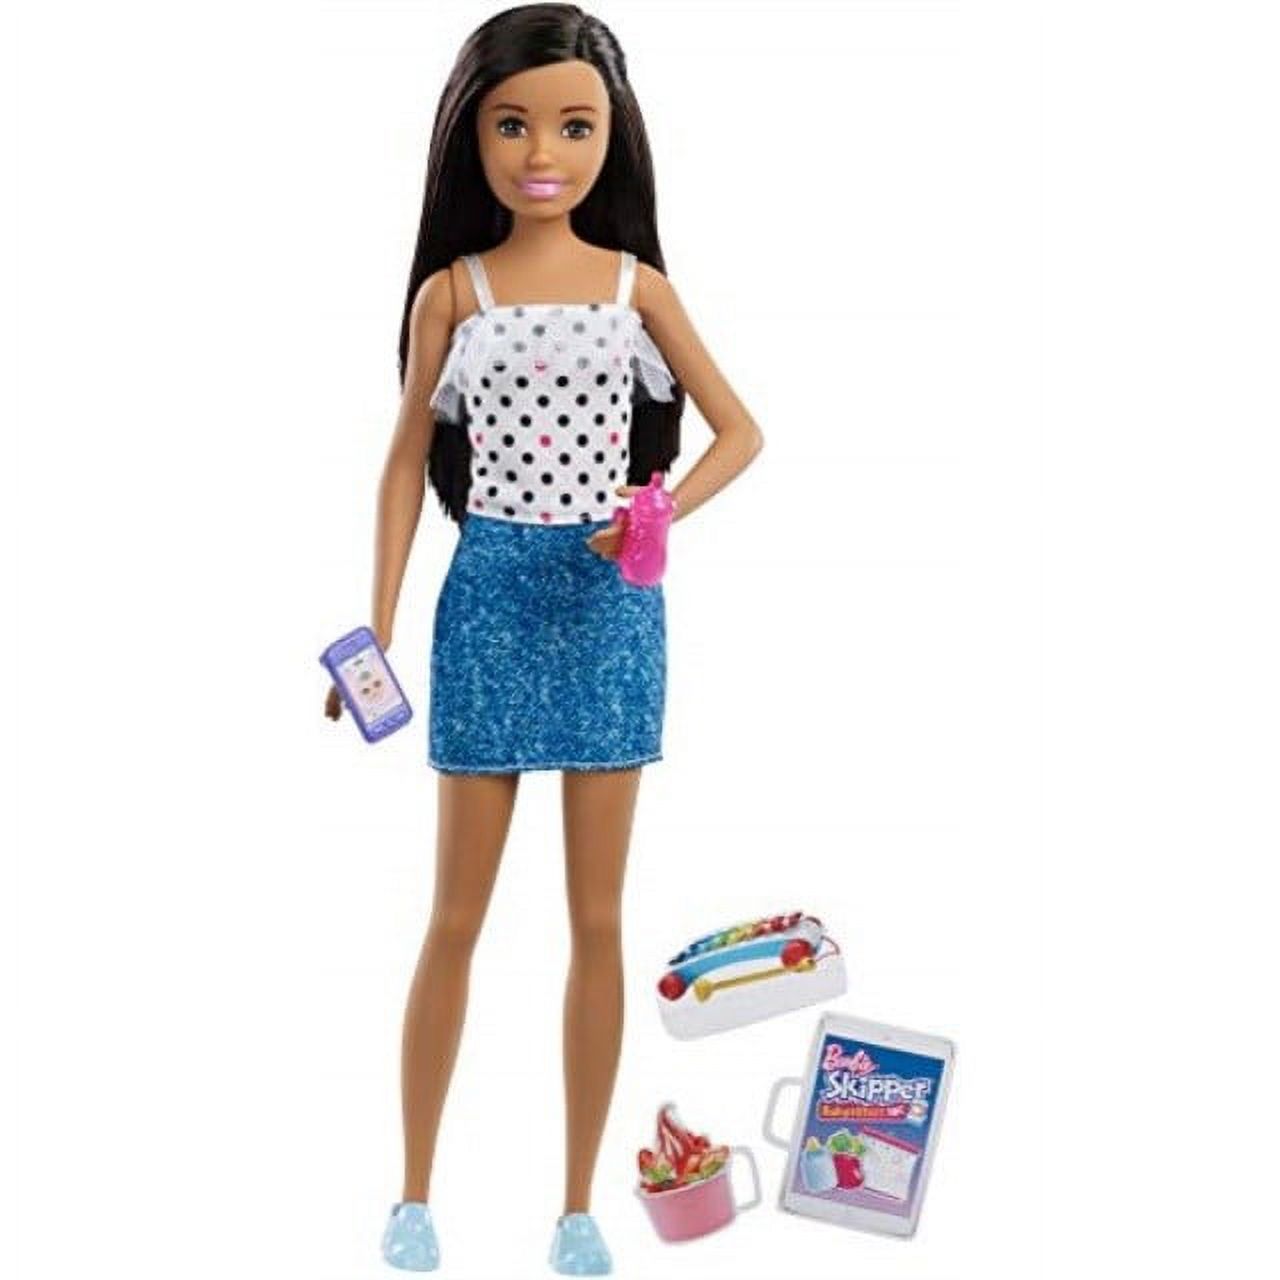 Barbie Skipper Babysitters Inc Doll & Accessories - image 1 of 1